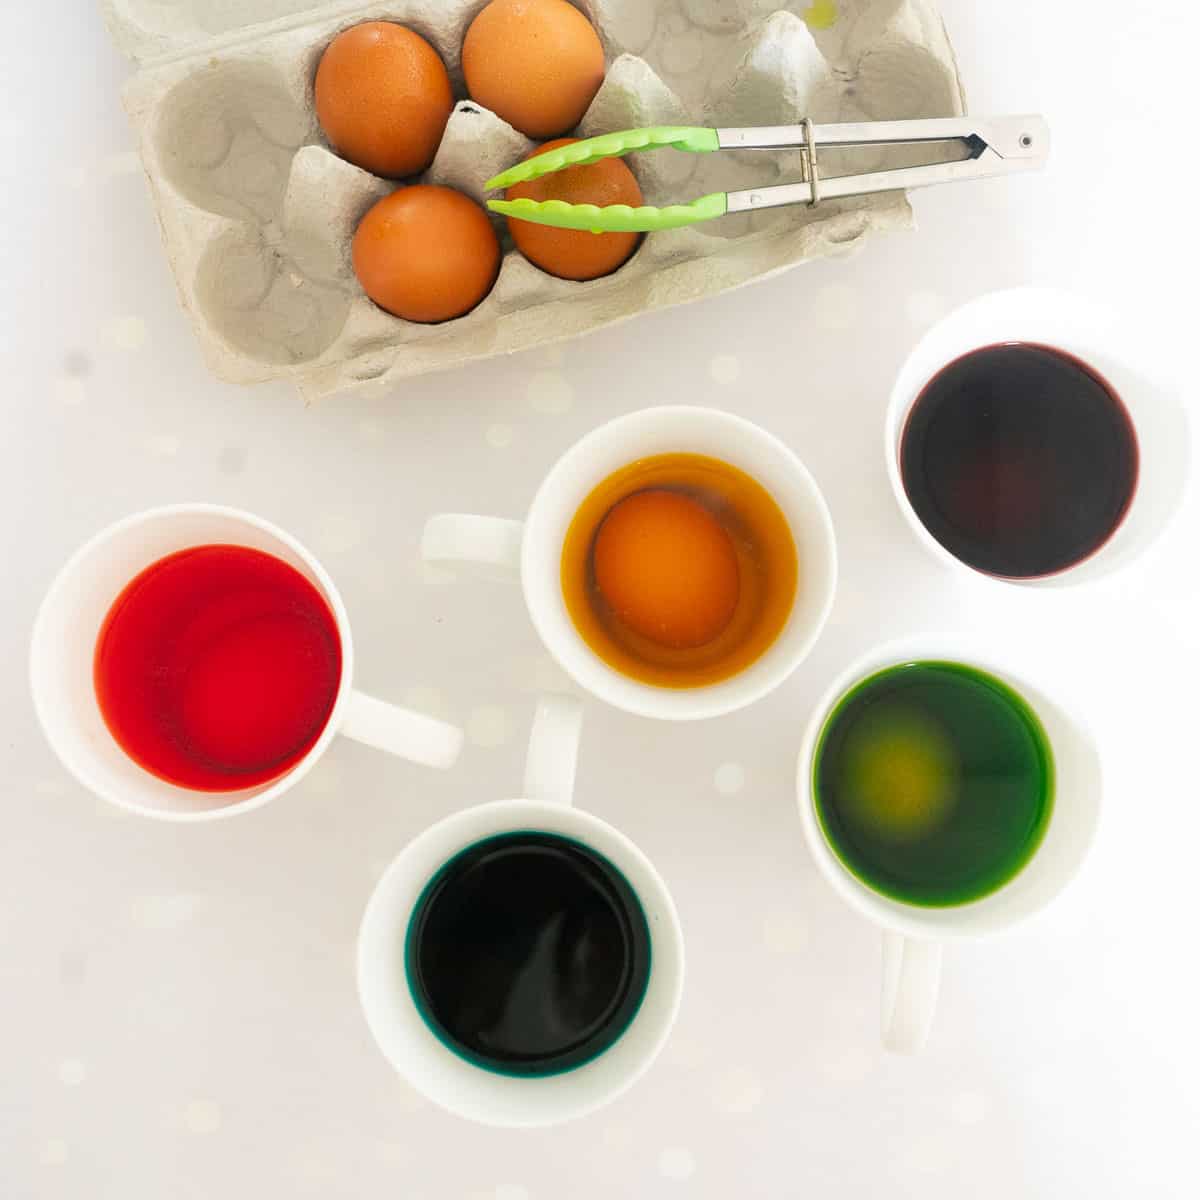 5 Eggs soaking in food colouring.